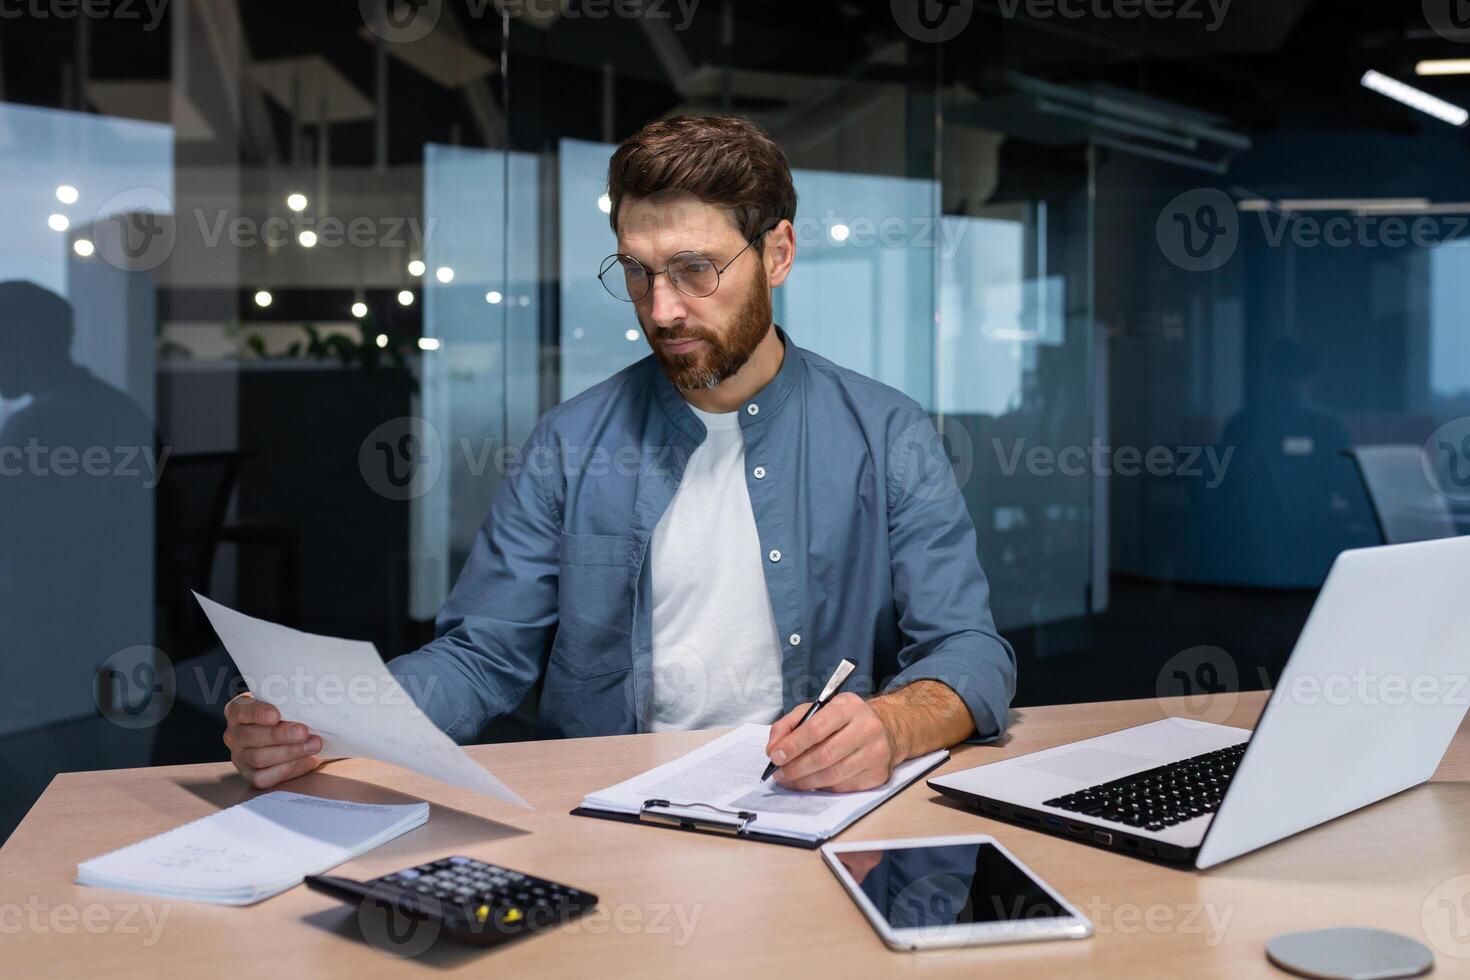 Serious and focused financier accountant on paper work inside office, mature man using calculator and laptop for calculating reports and summarizing accounts, businessman at work in casual clothes. photo